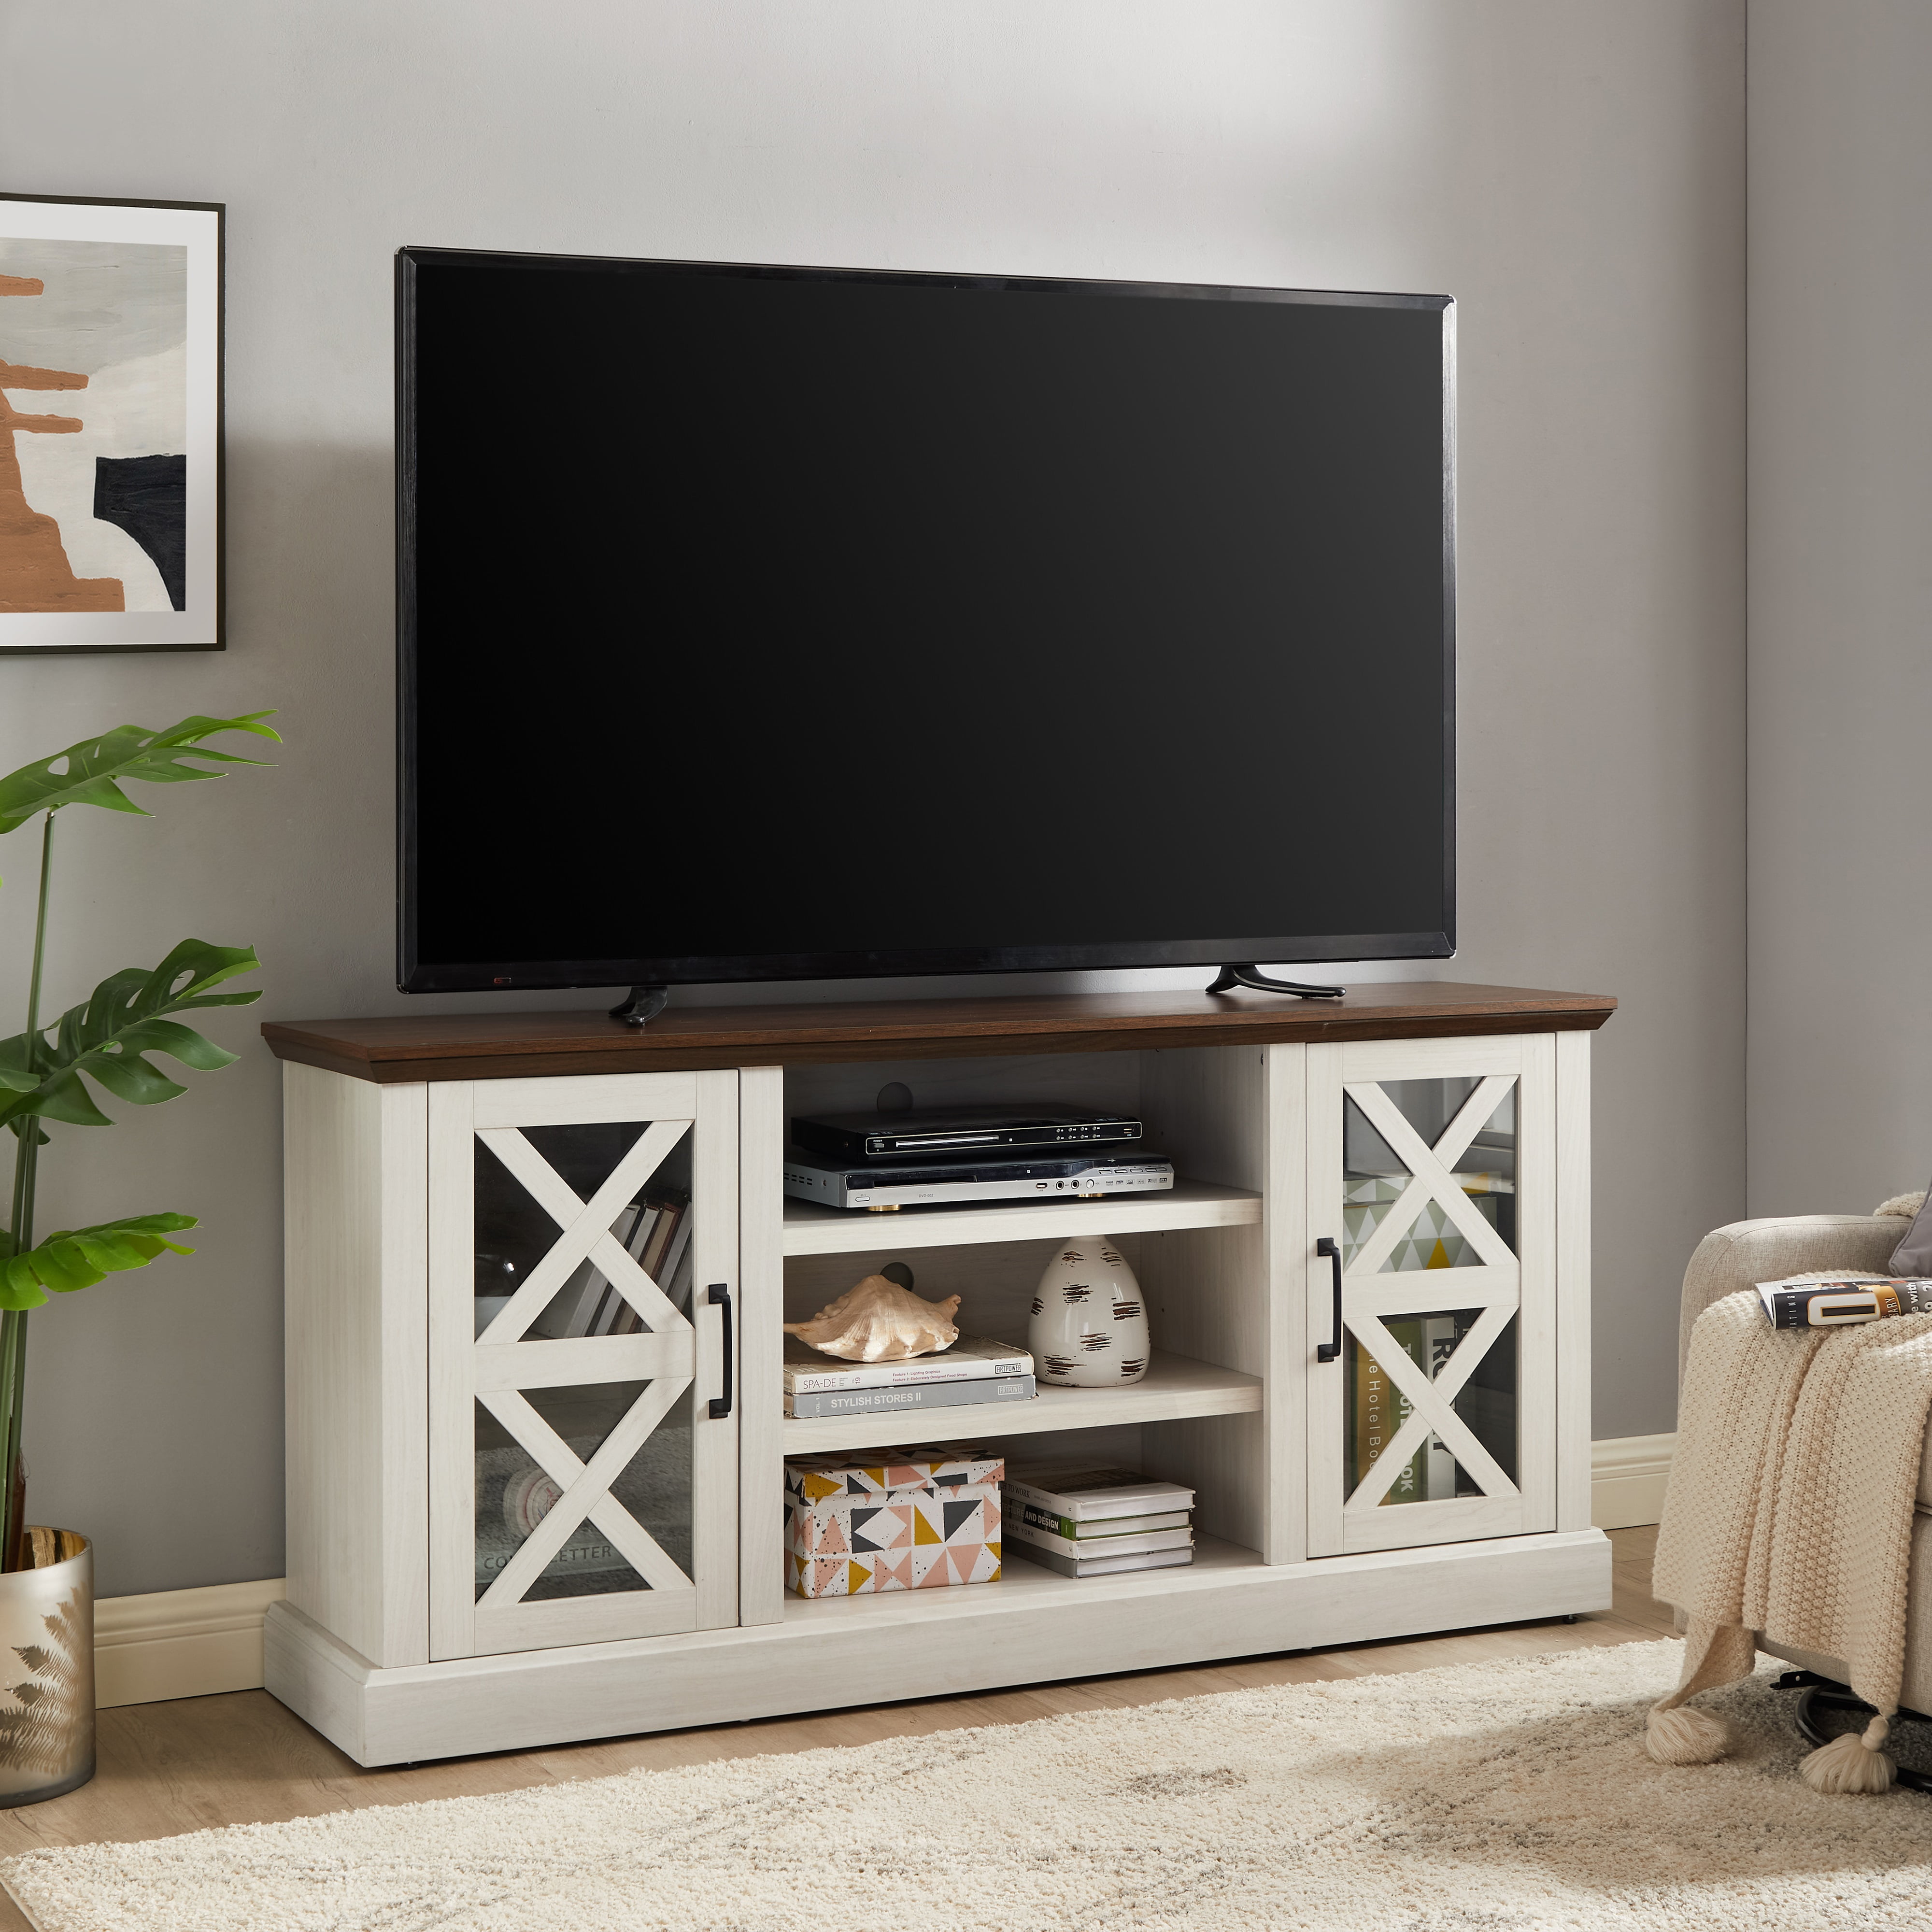 Walmart Mainstays Furniture Clearance - up to 70% Off